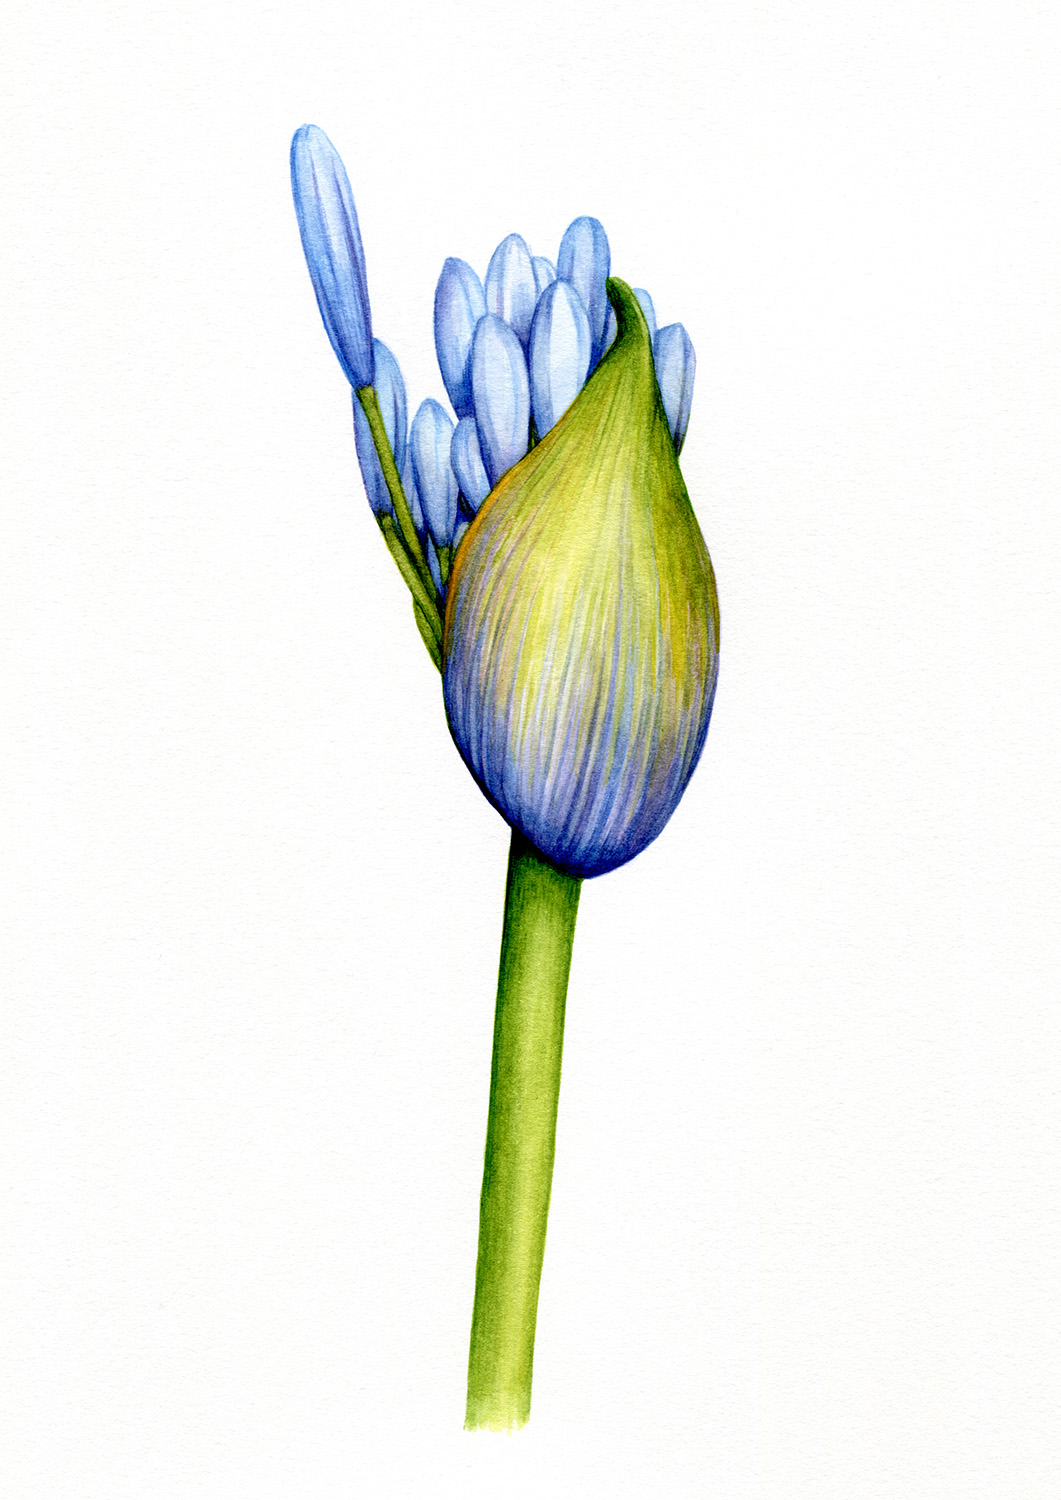 oona-culley-agapanthus-bud-A5